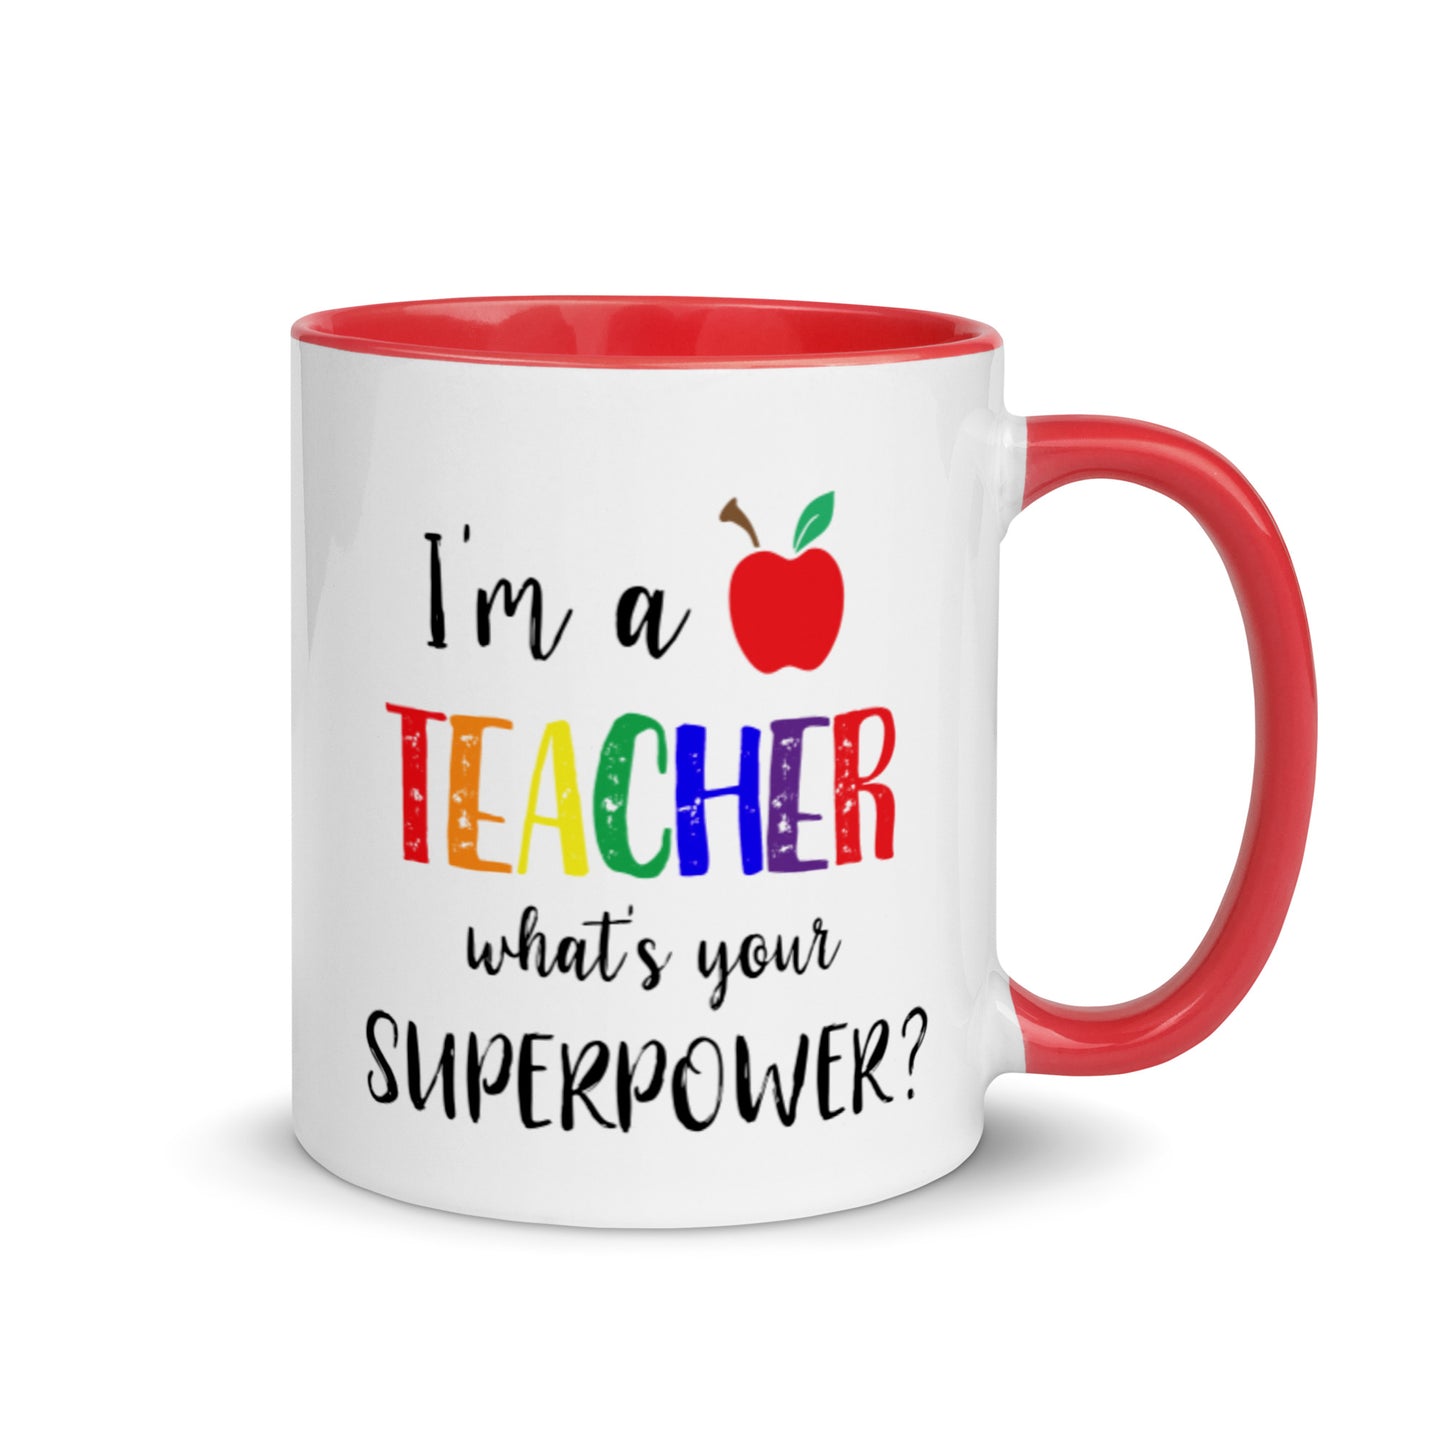 I'm a teacher what's your superpower mug with red interior